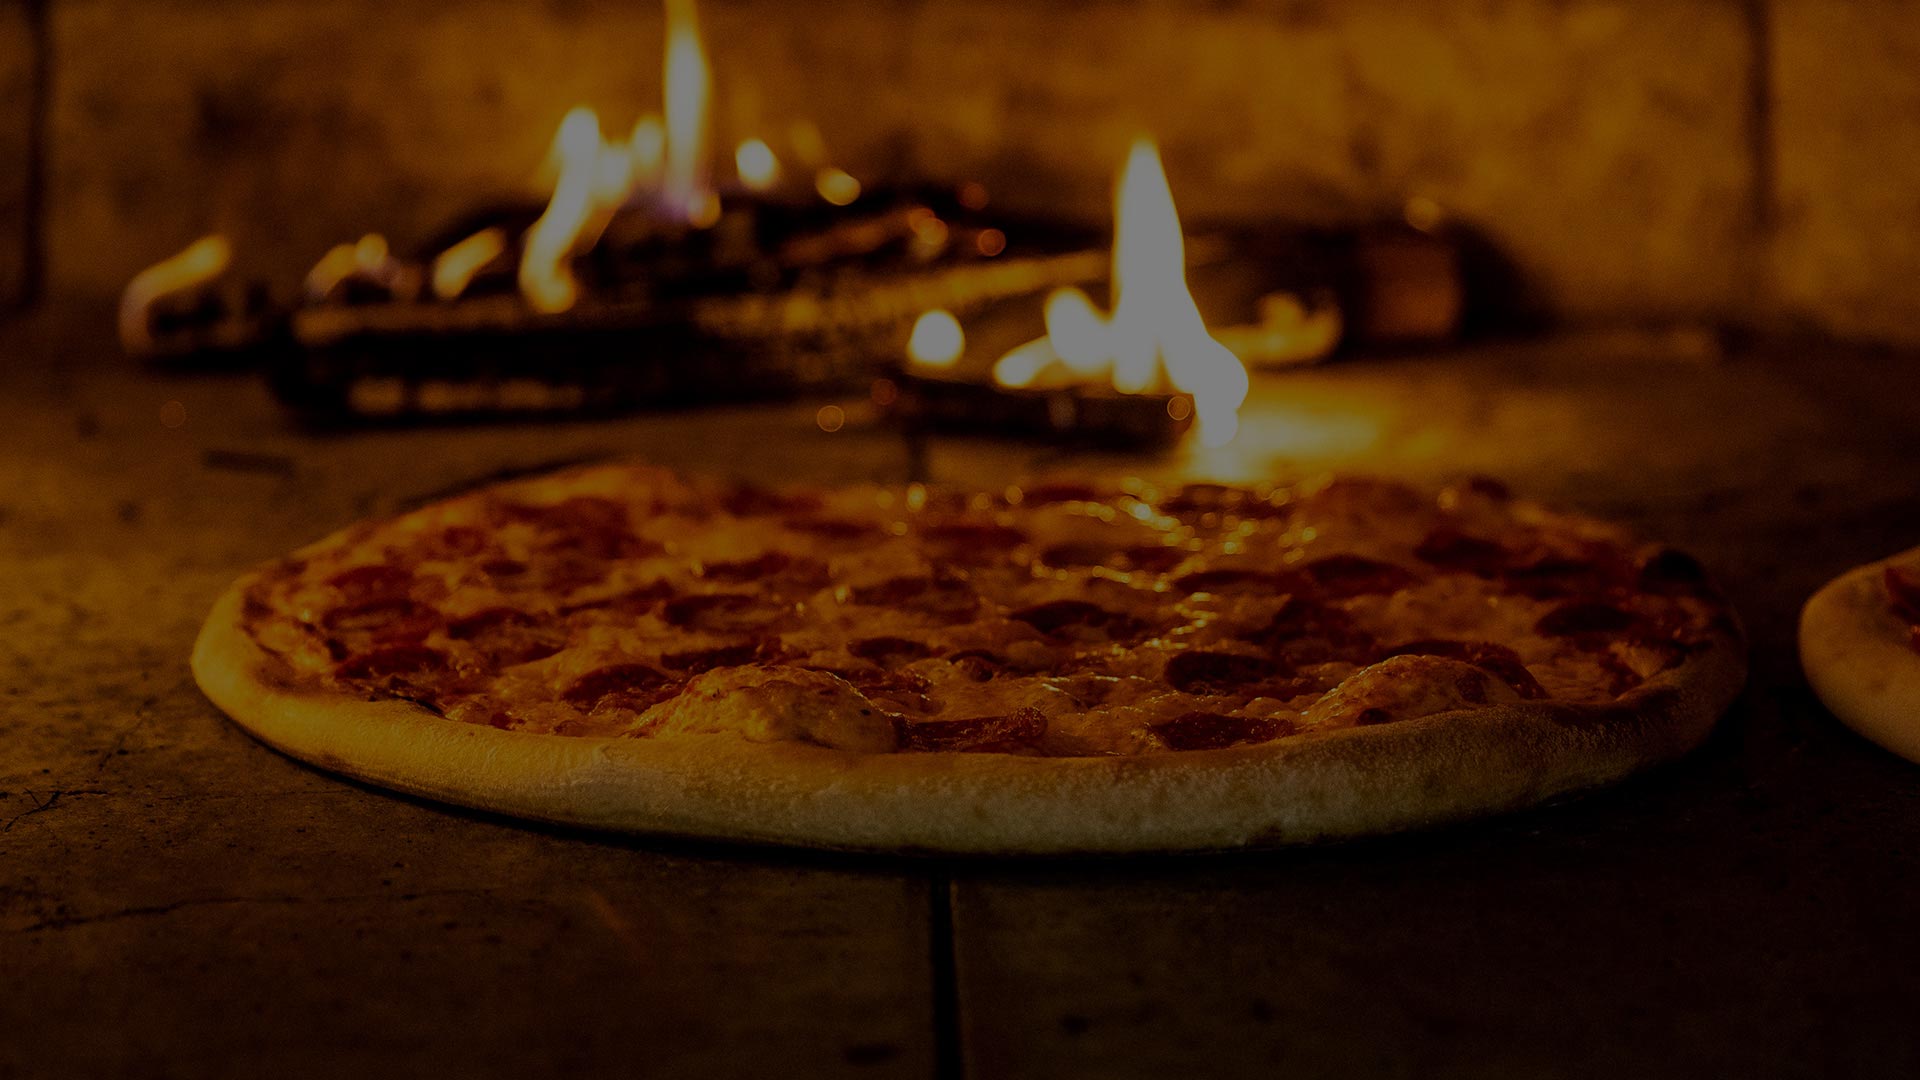 WOOD FIRED PIZZA